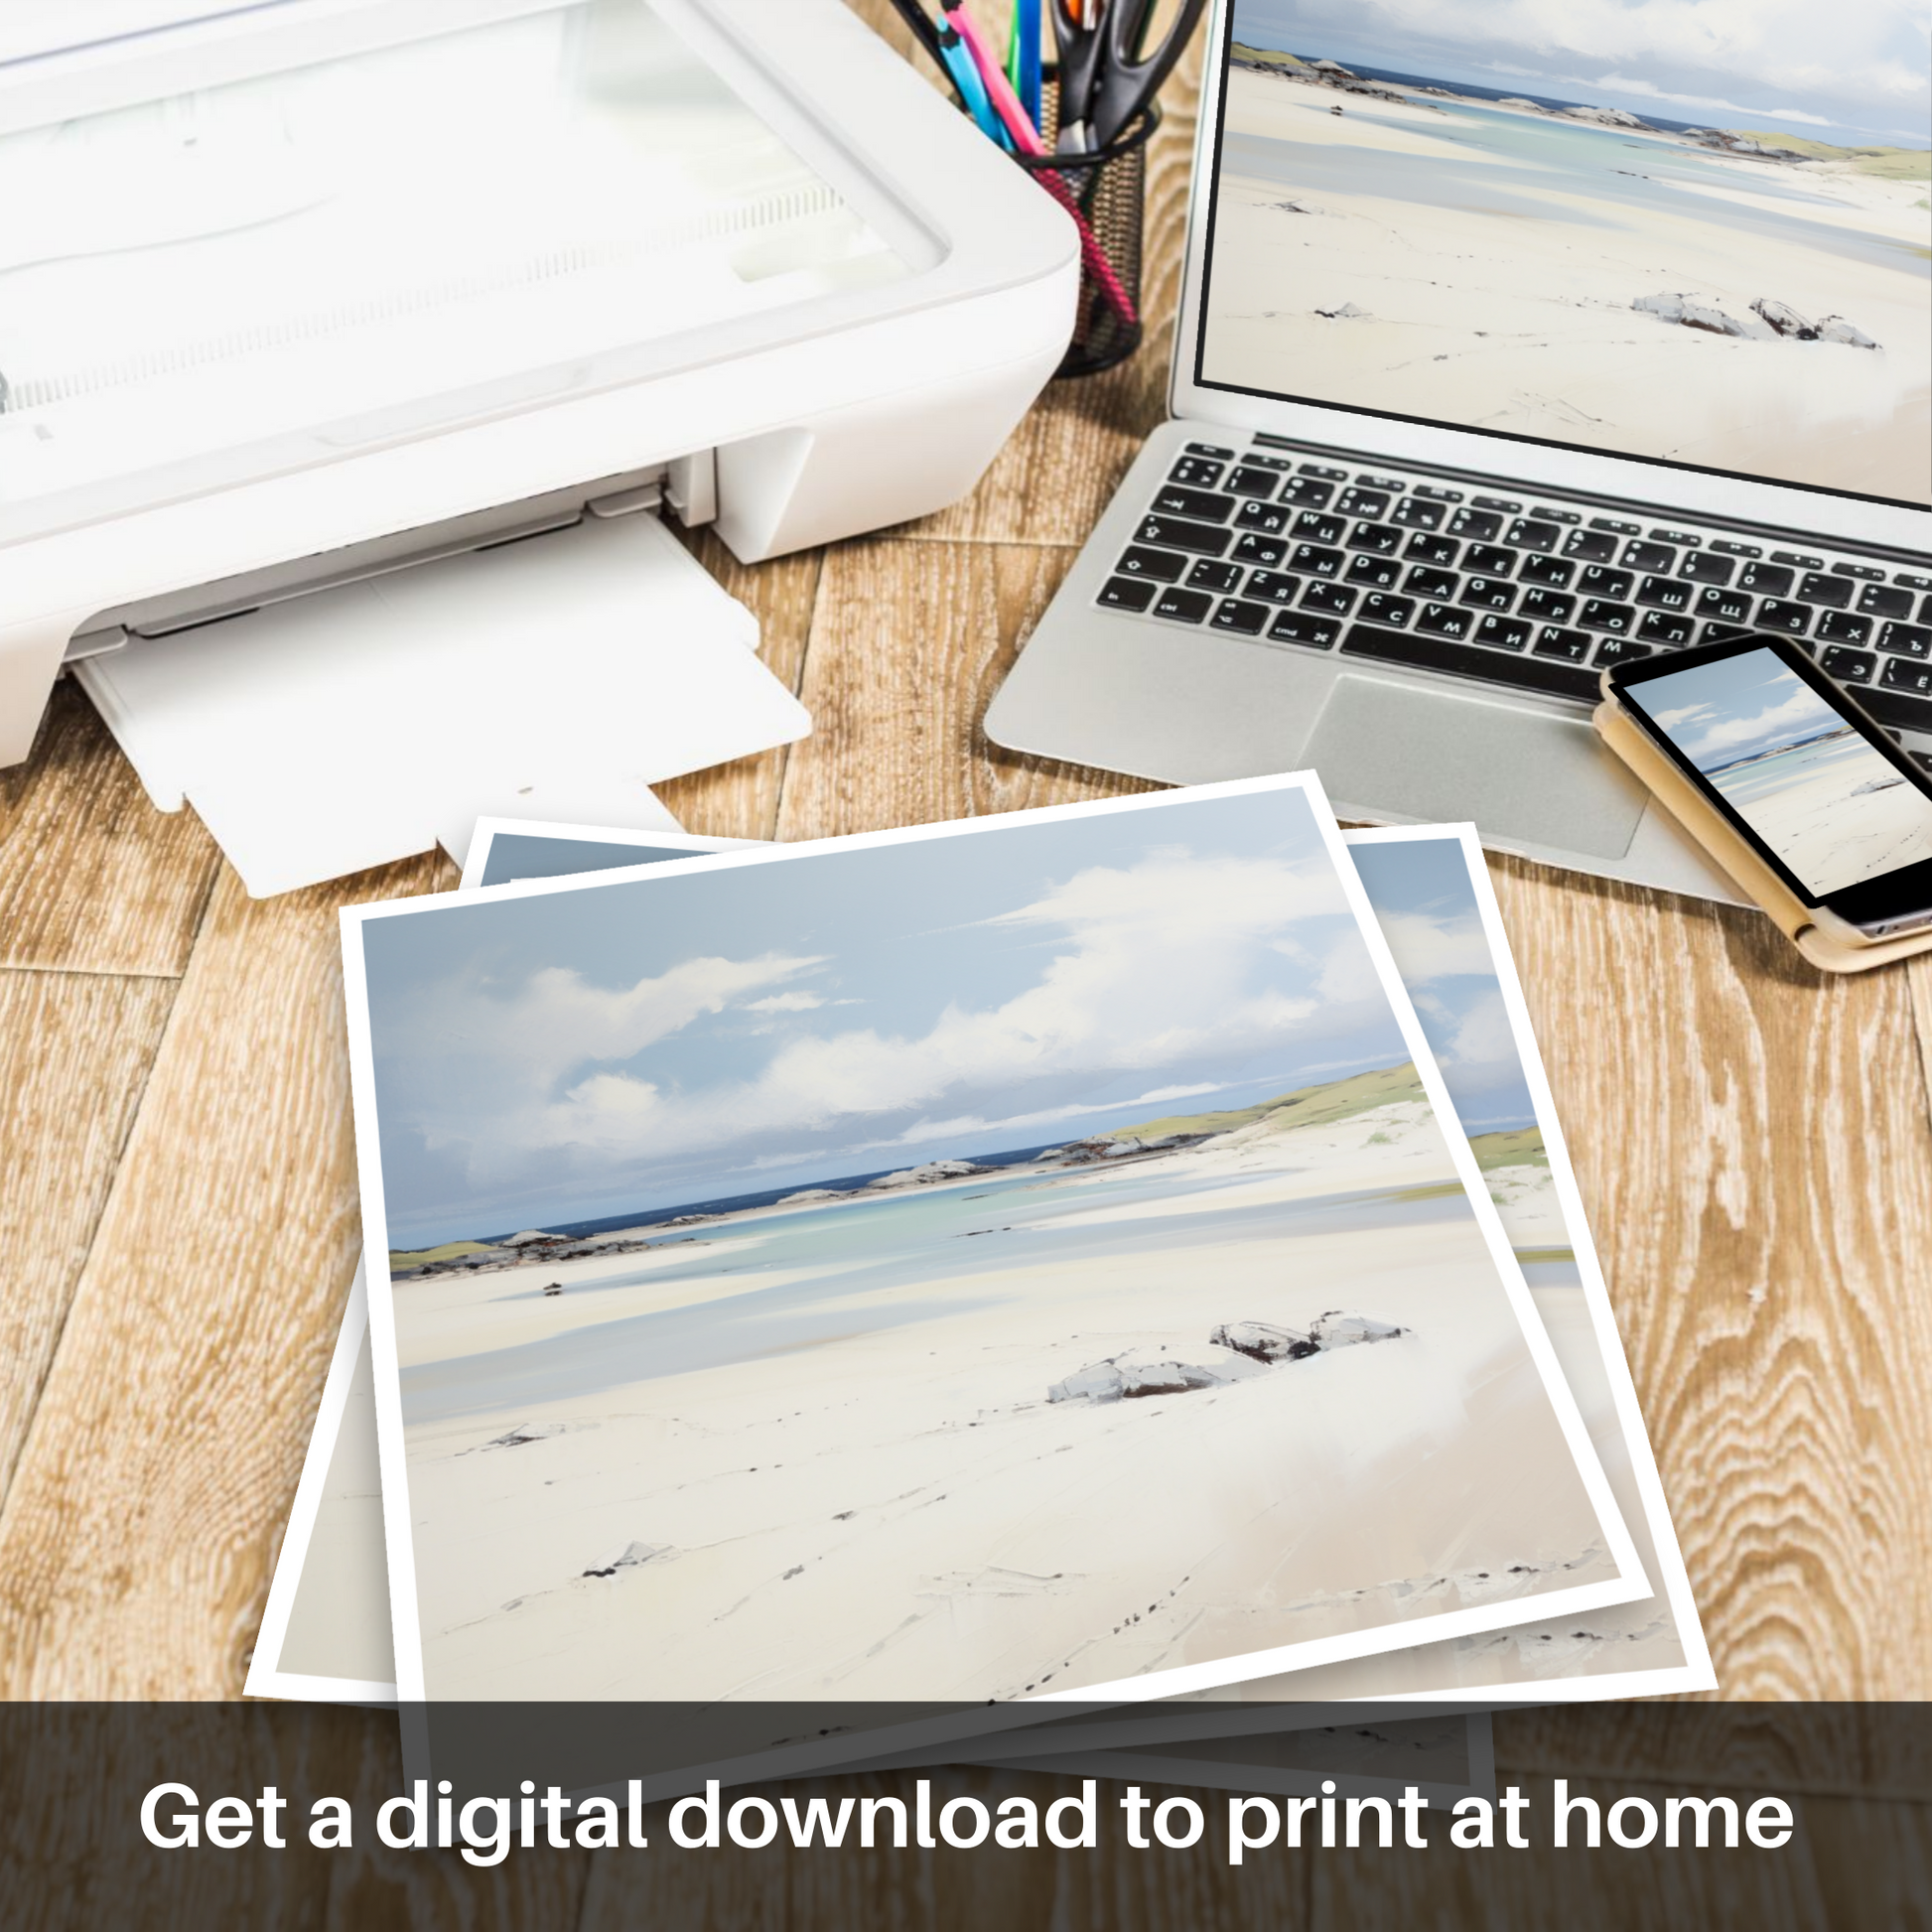 Downloadable and printable picture of Camusdarach Beach, Arisaig